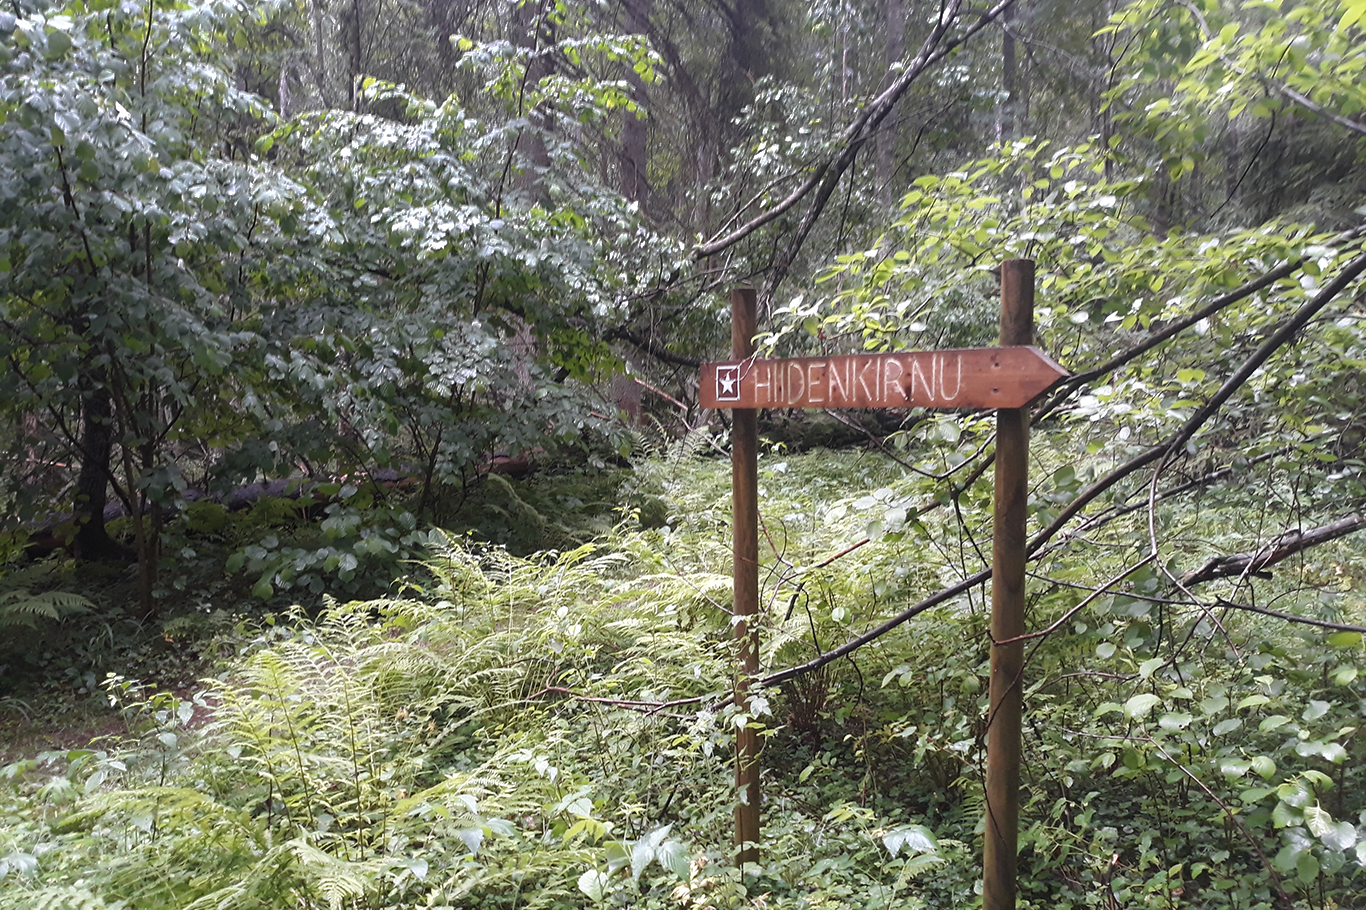 A sign in the forest.